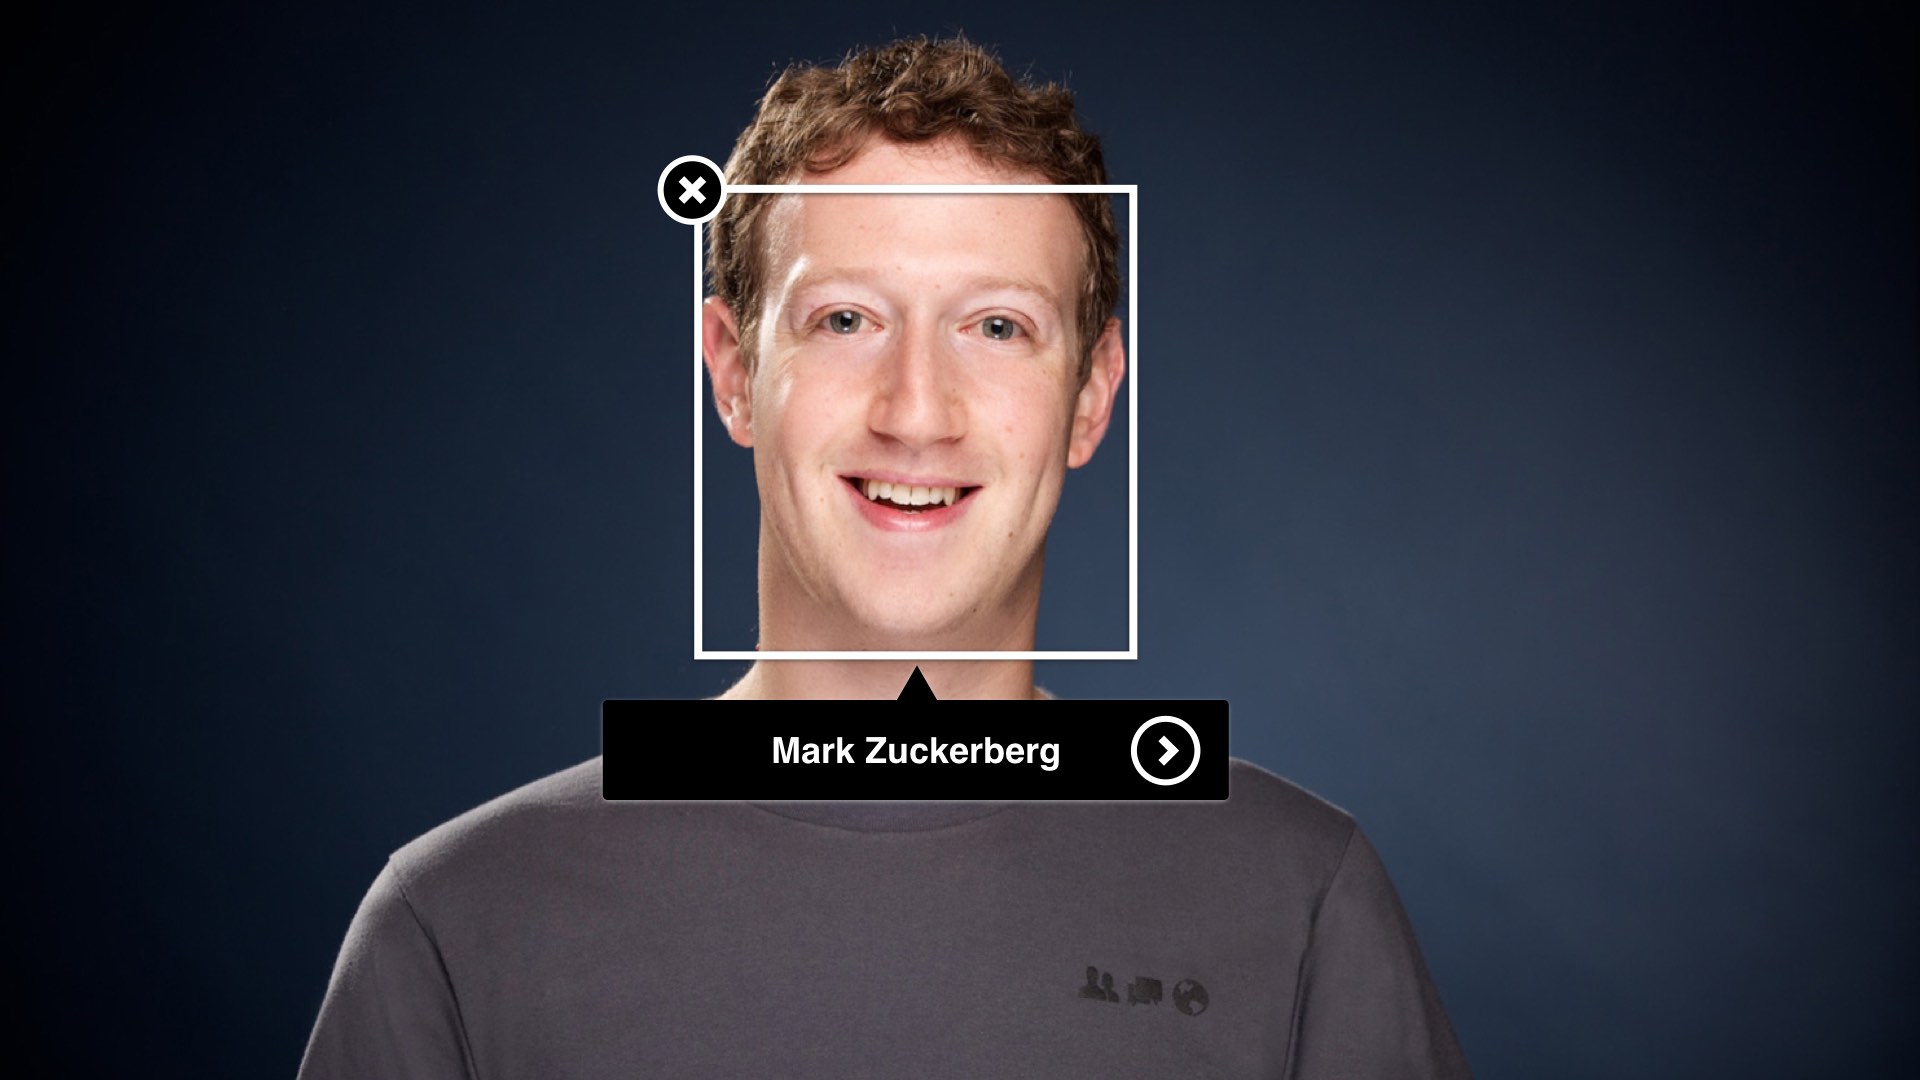 Facebook will no longer use facial recognition to tag users in photos and videos. Why?